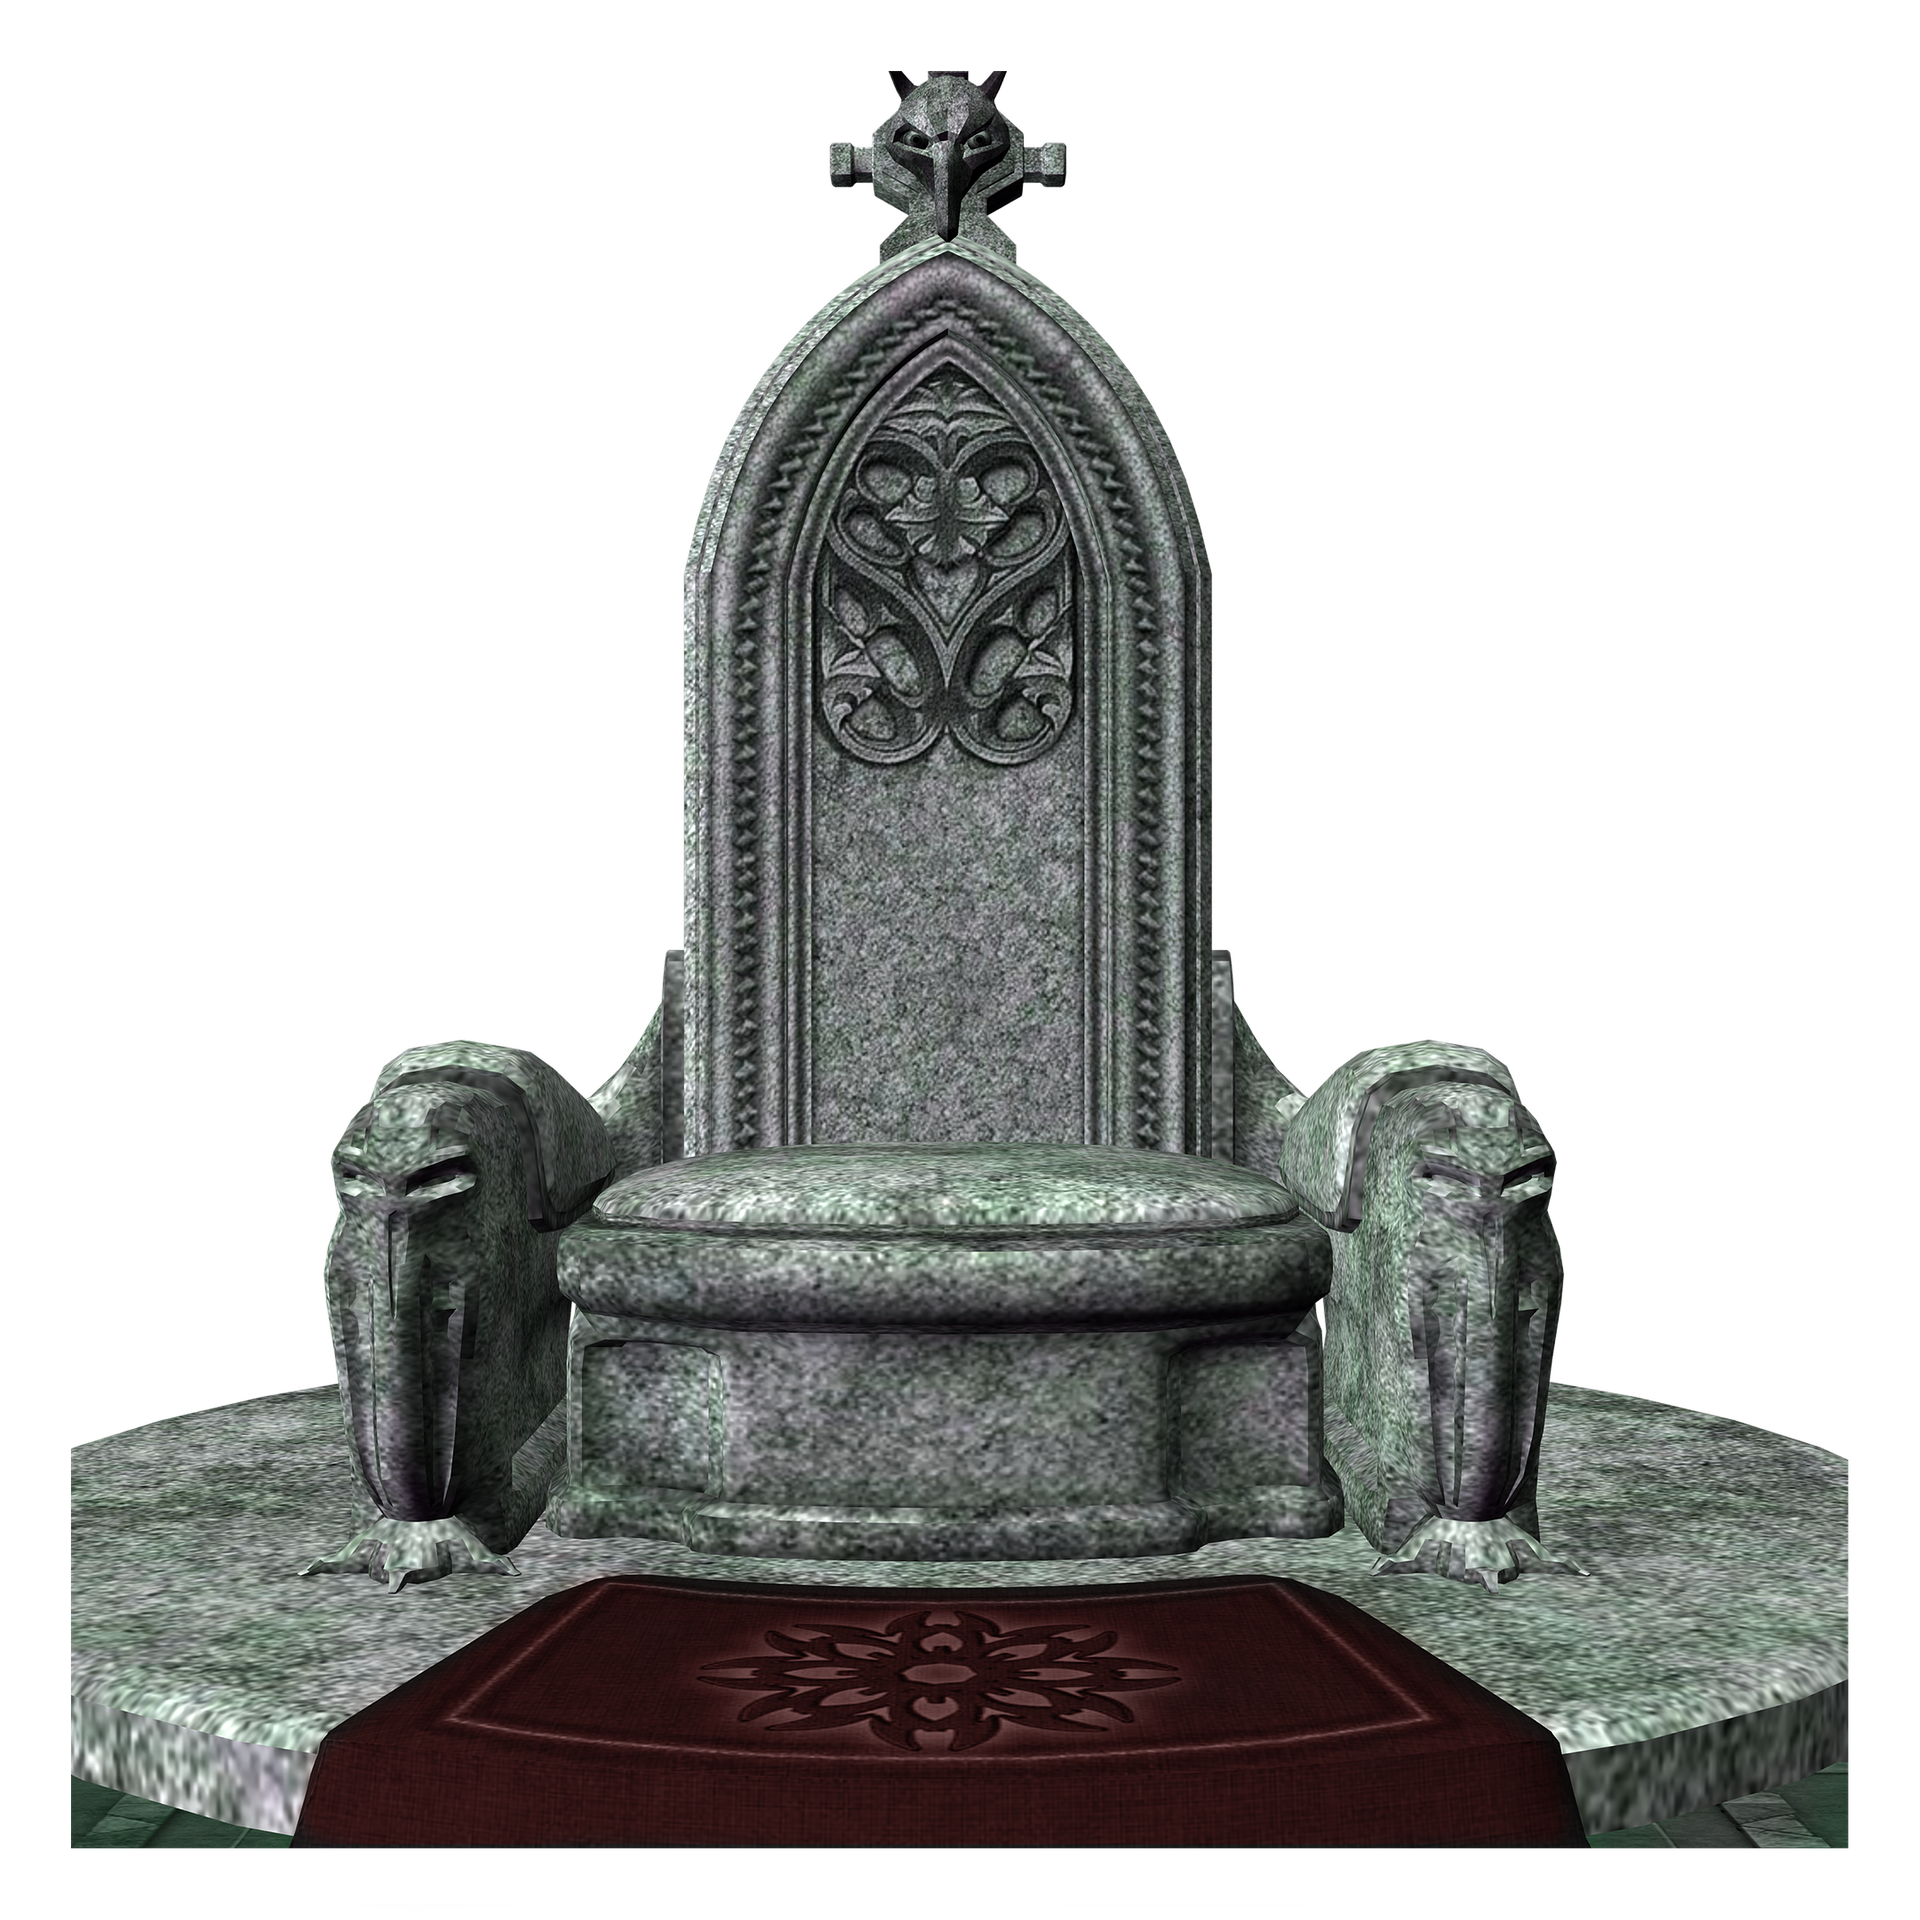 throne-3446300_1920.png